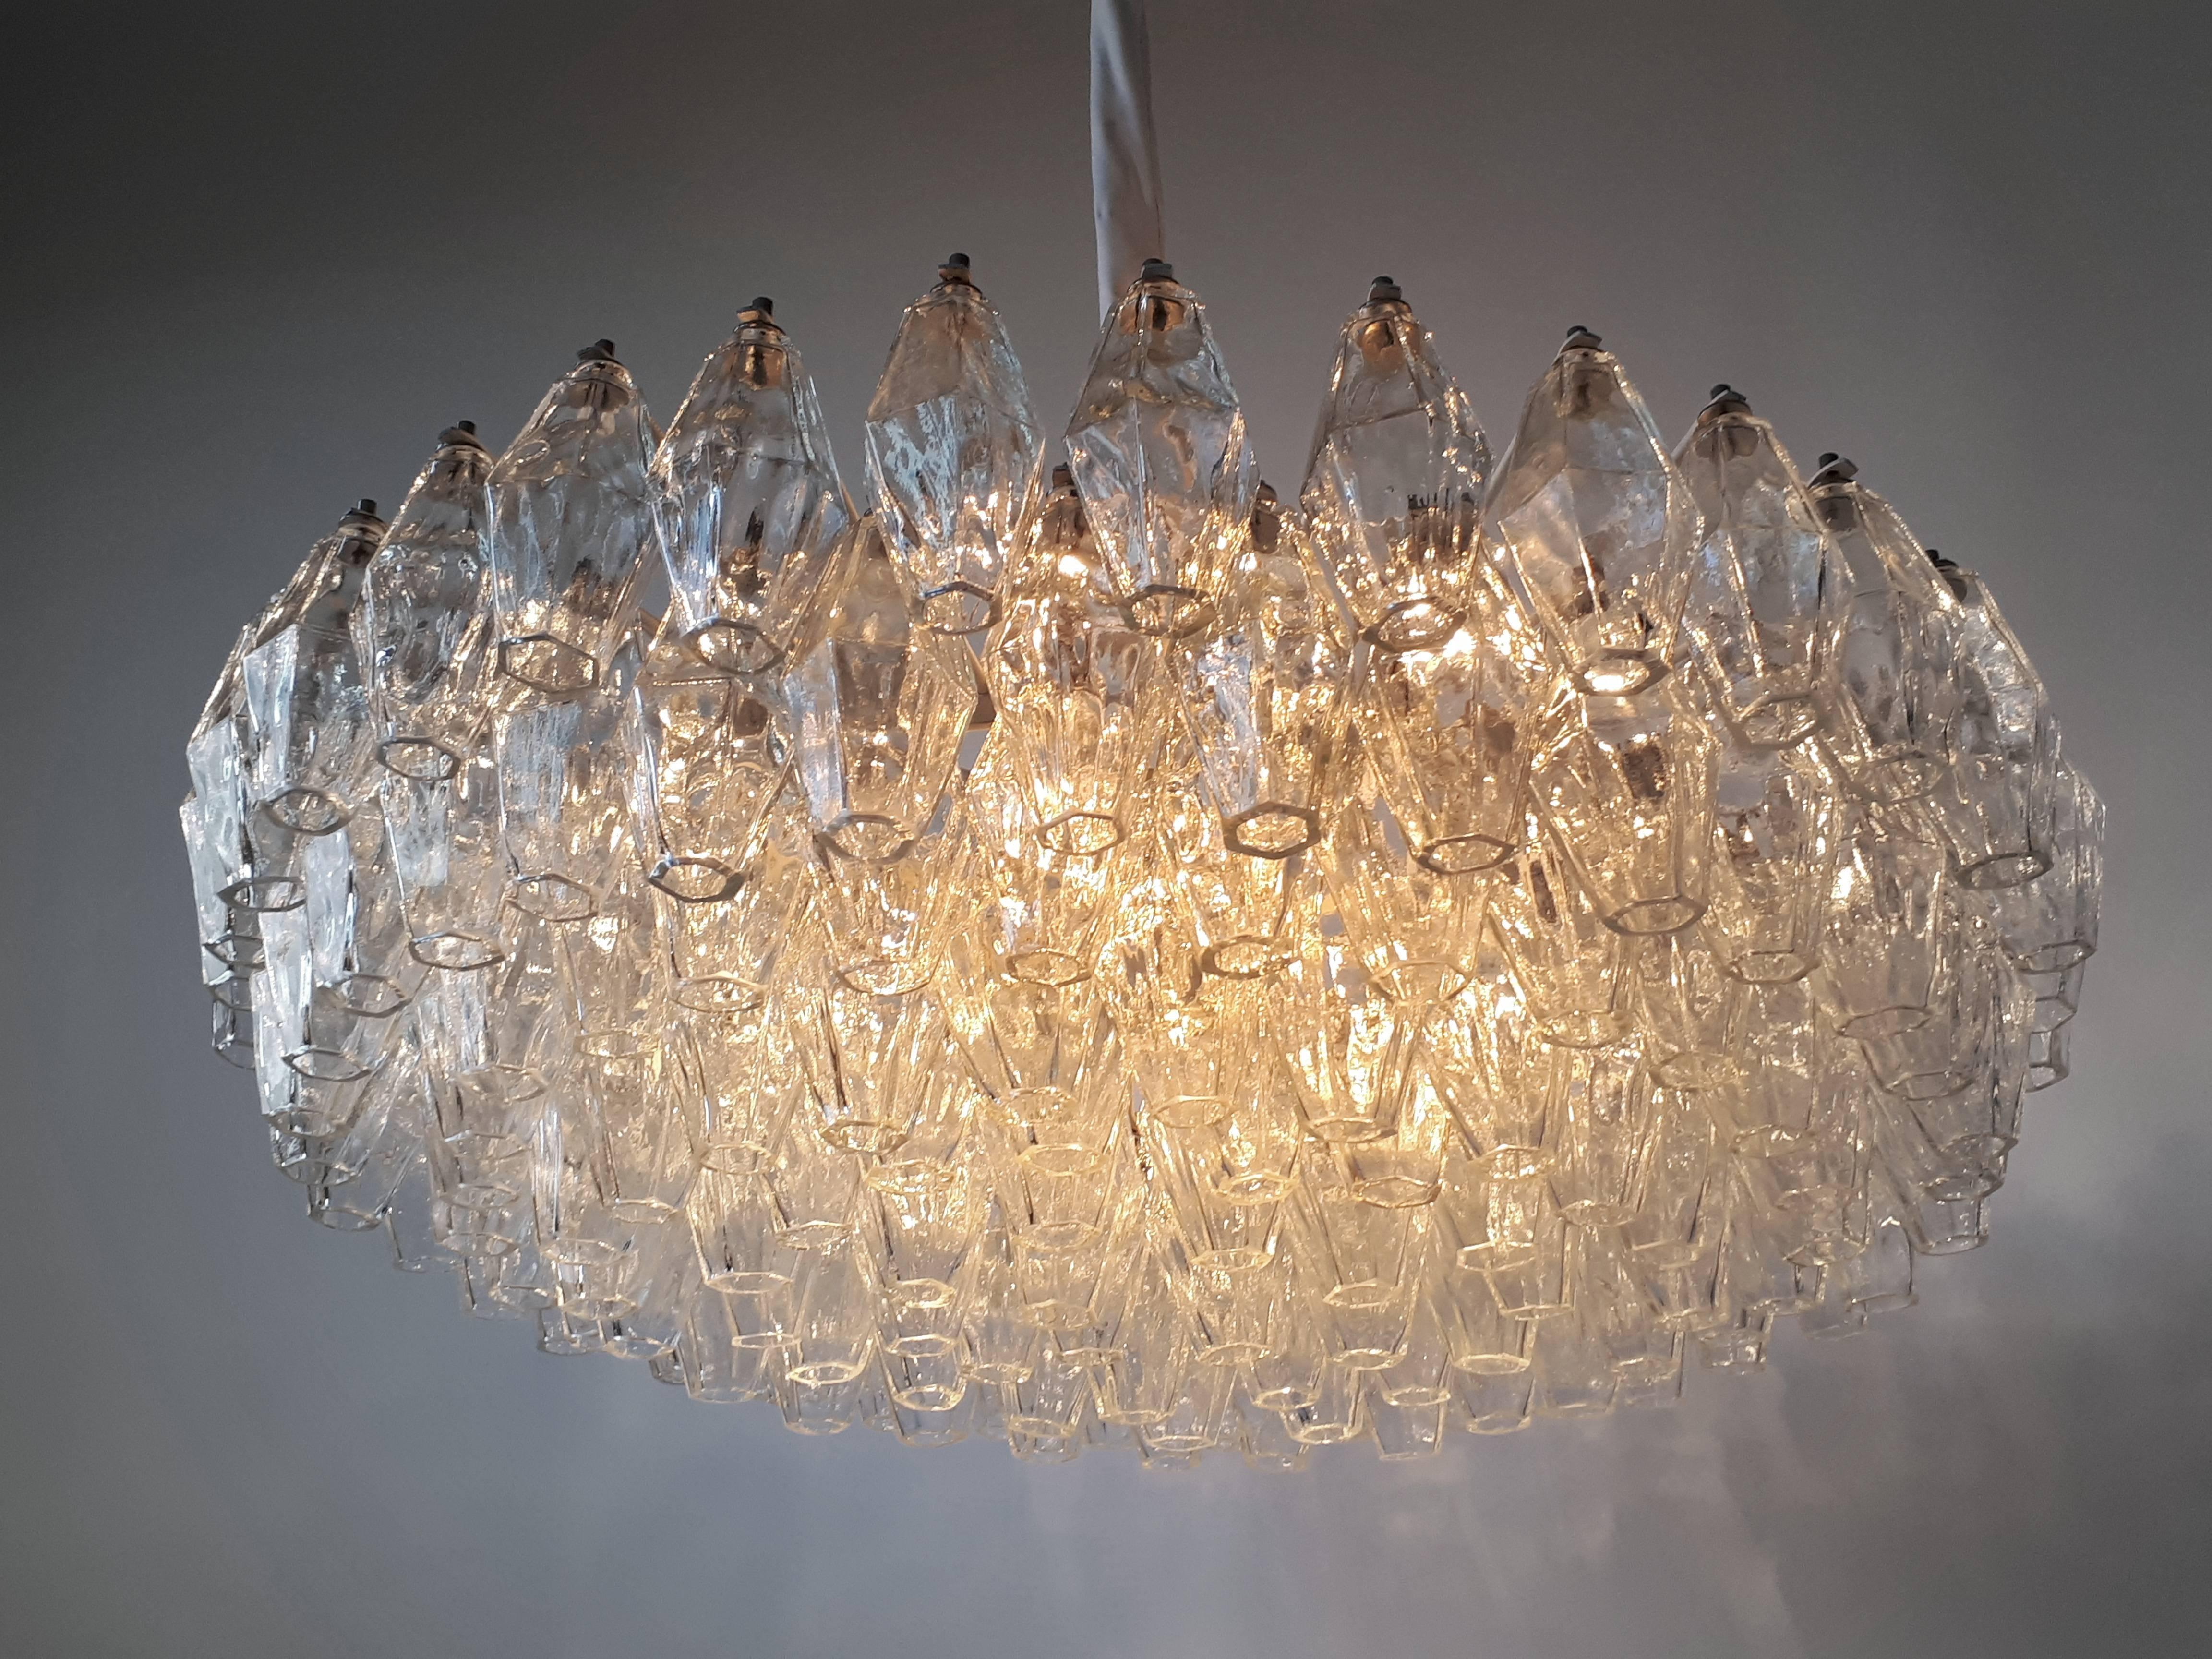 Large elegant chandelier made of individual multifaceted mouth blown glass pieces (poliedre).

Contains 11 E13 candelabra size light bulbs rated at 60 watts maximum. 

Designed by Carlo Scarpa.

Frame is all hand assembled and welded.

On each